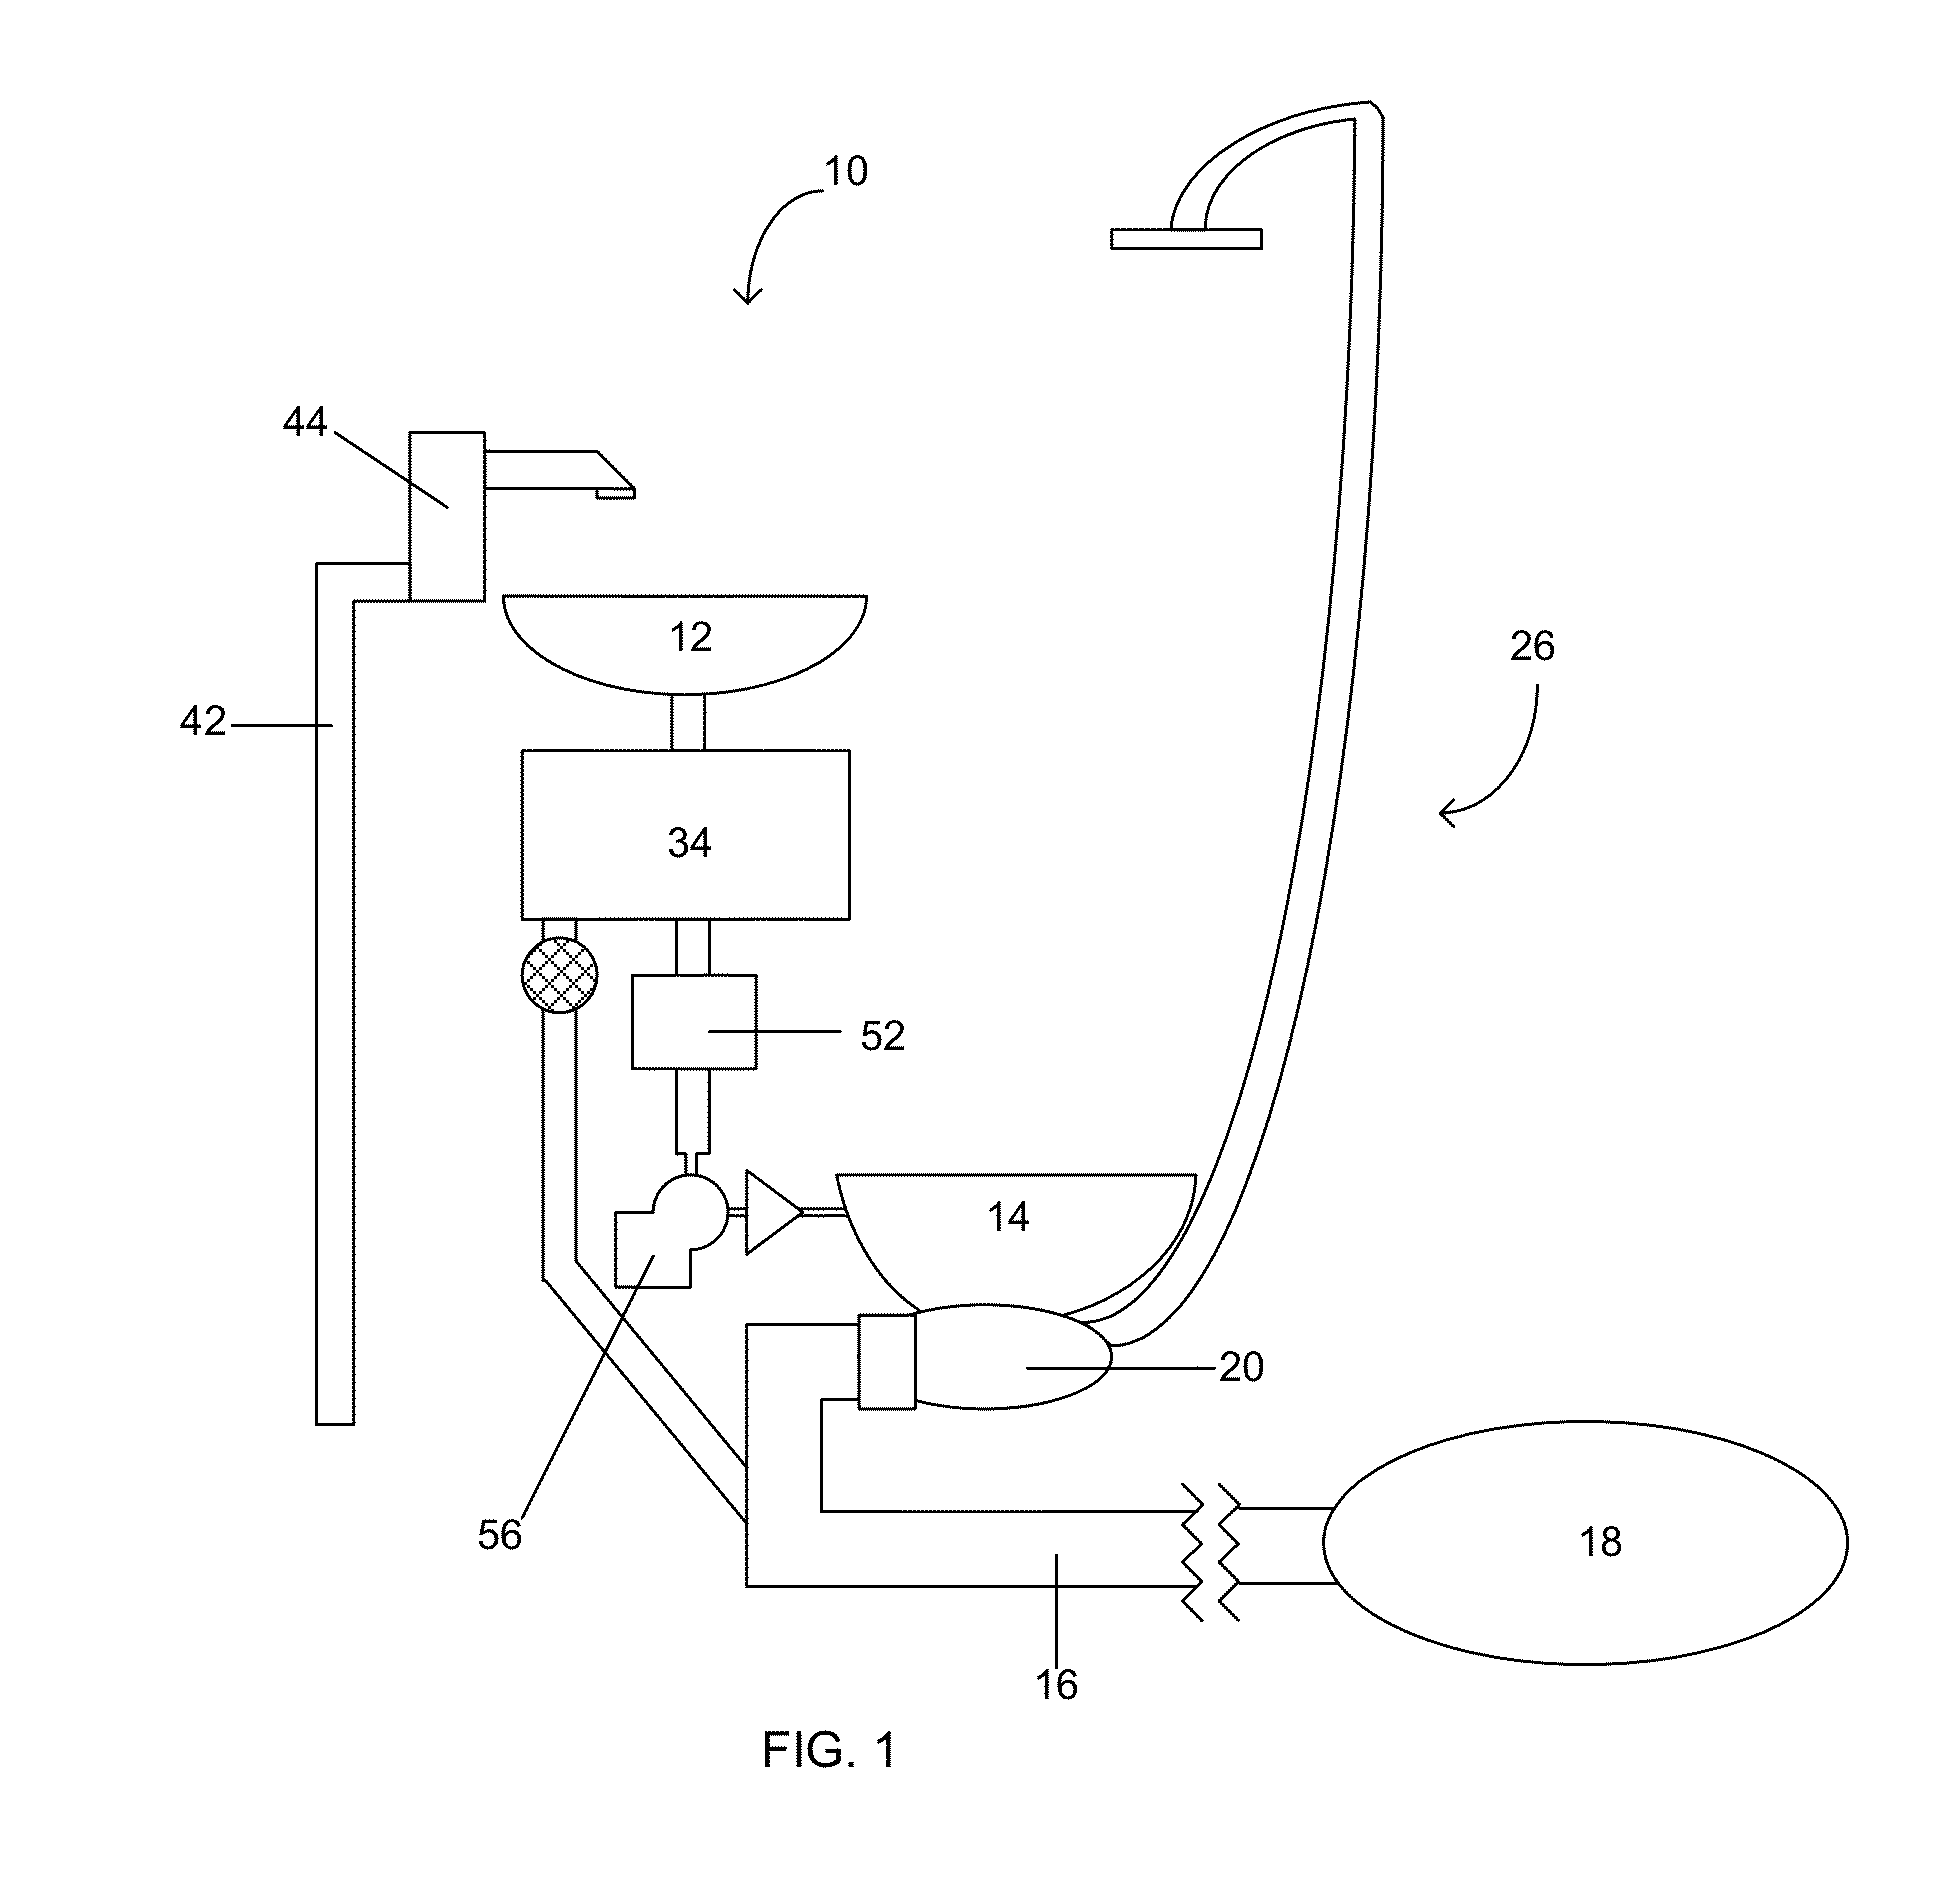 Two-stage flush and grey water flush systems and devices